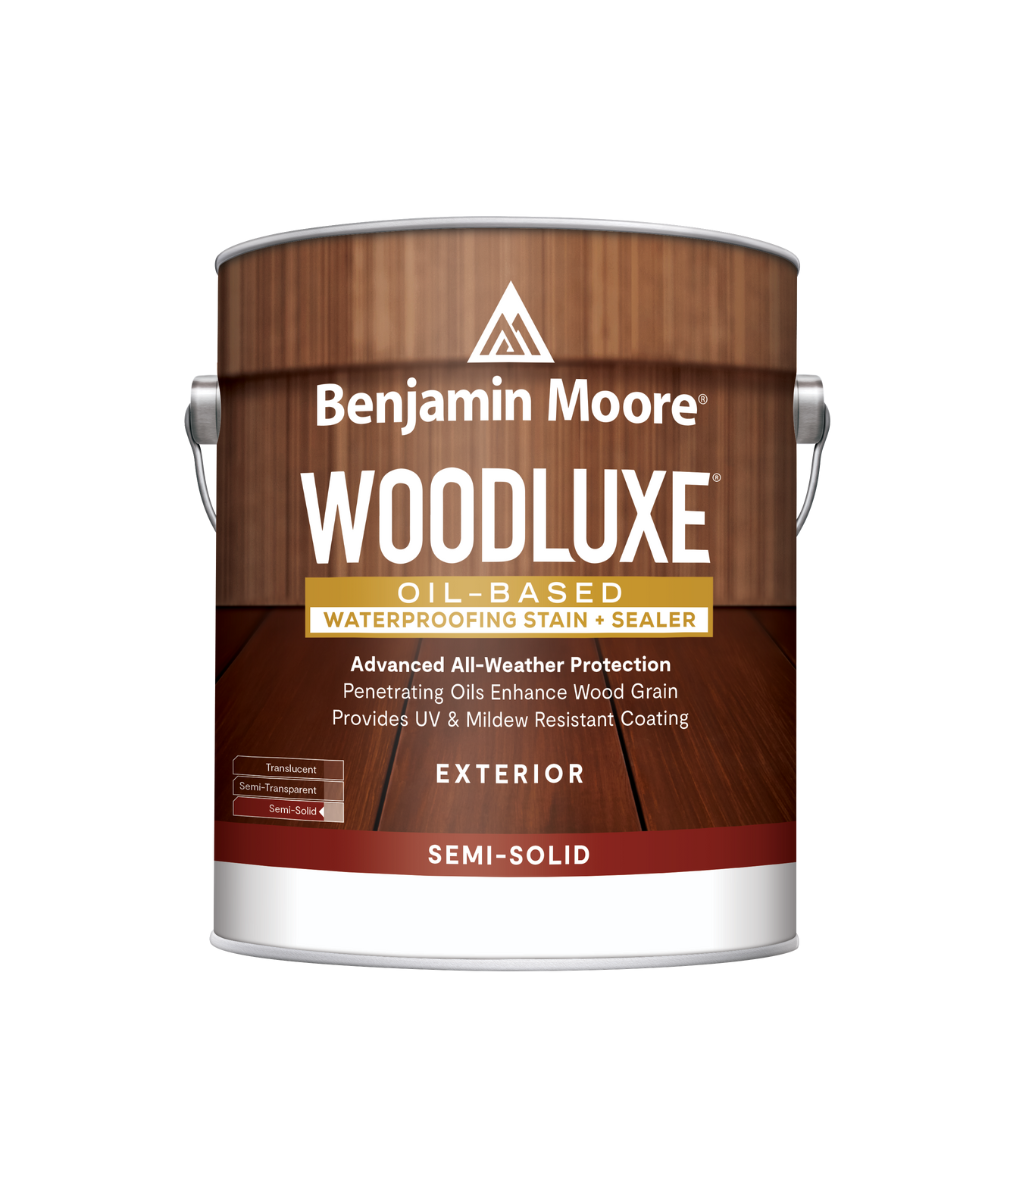 Benjamin Moore Woodluxe Semi-Solid Oil Base available at Wallauer.